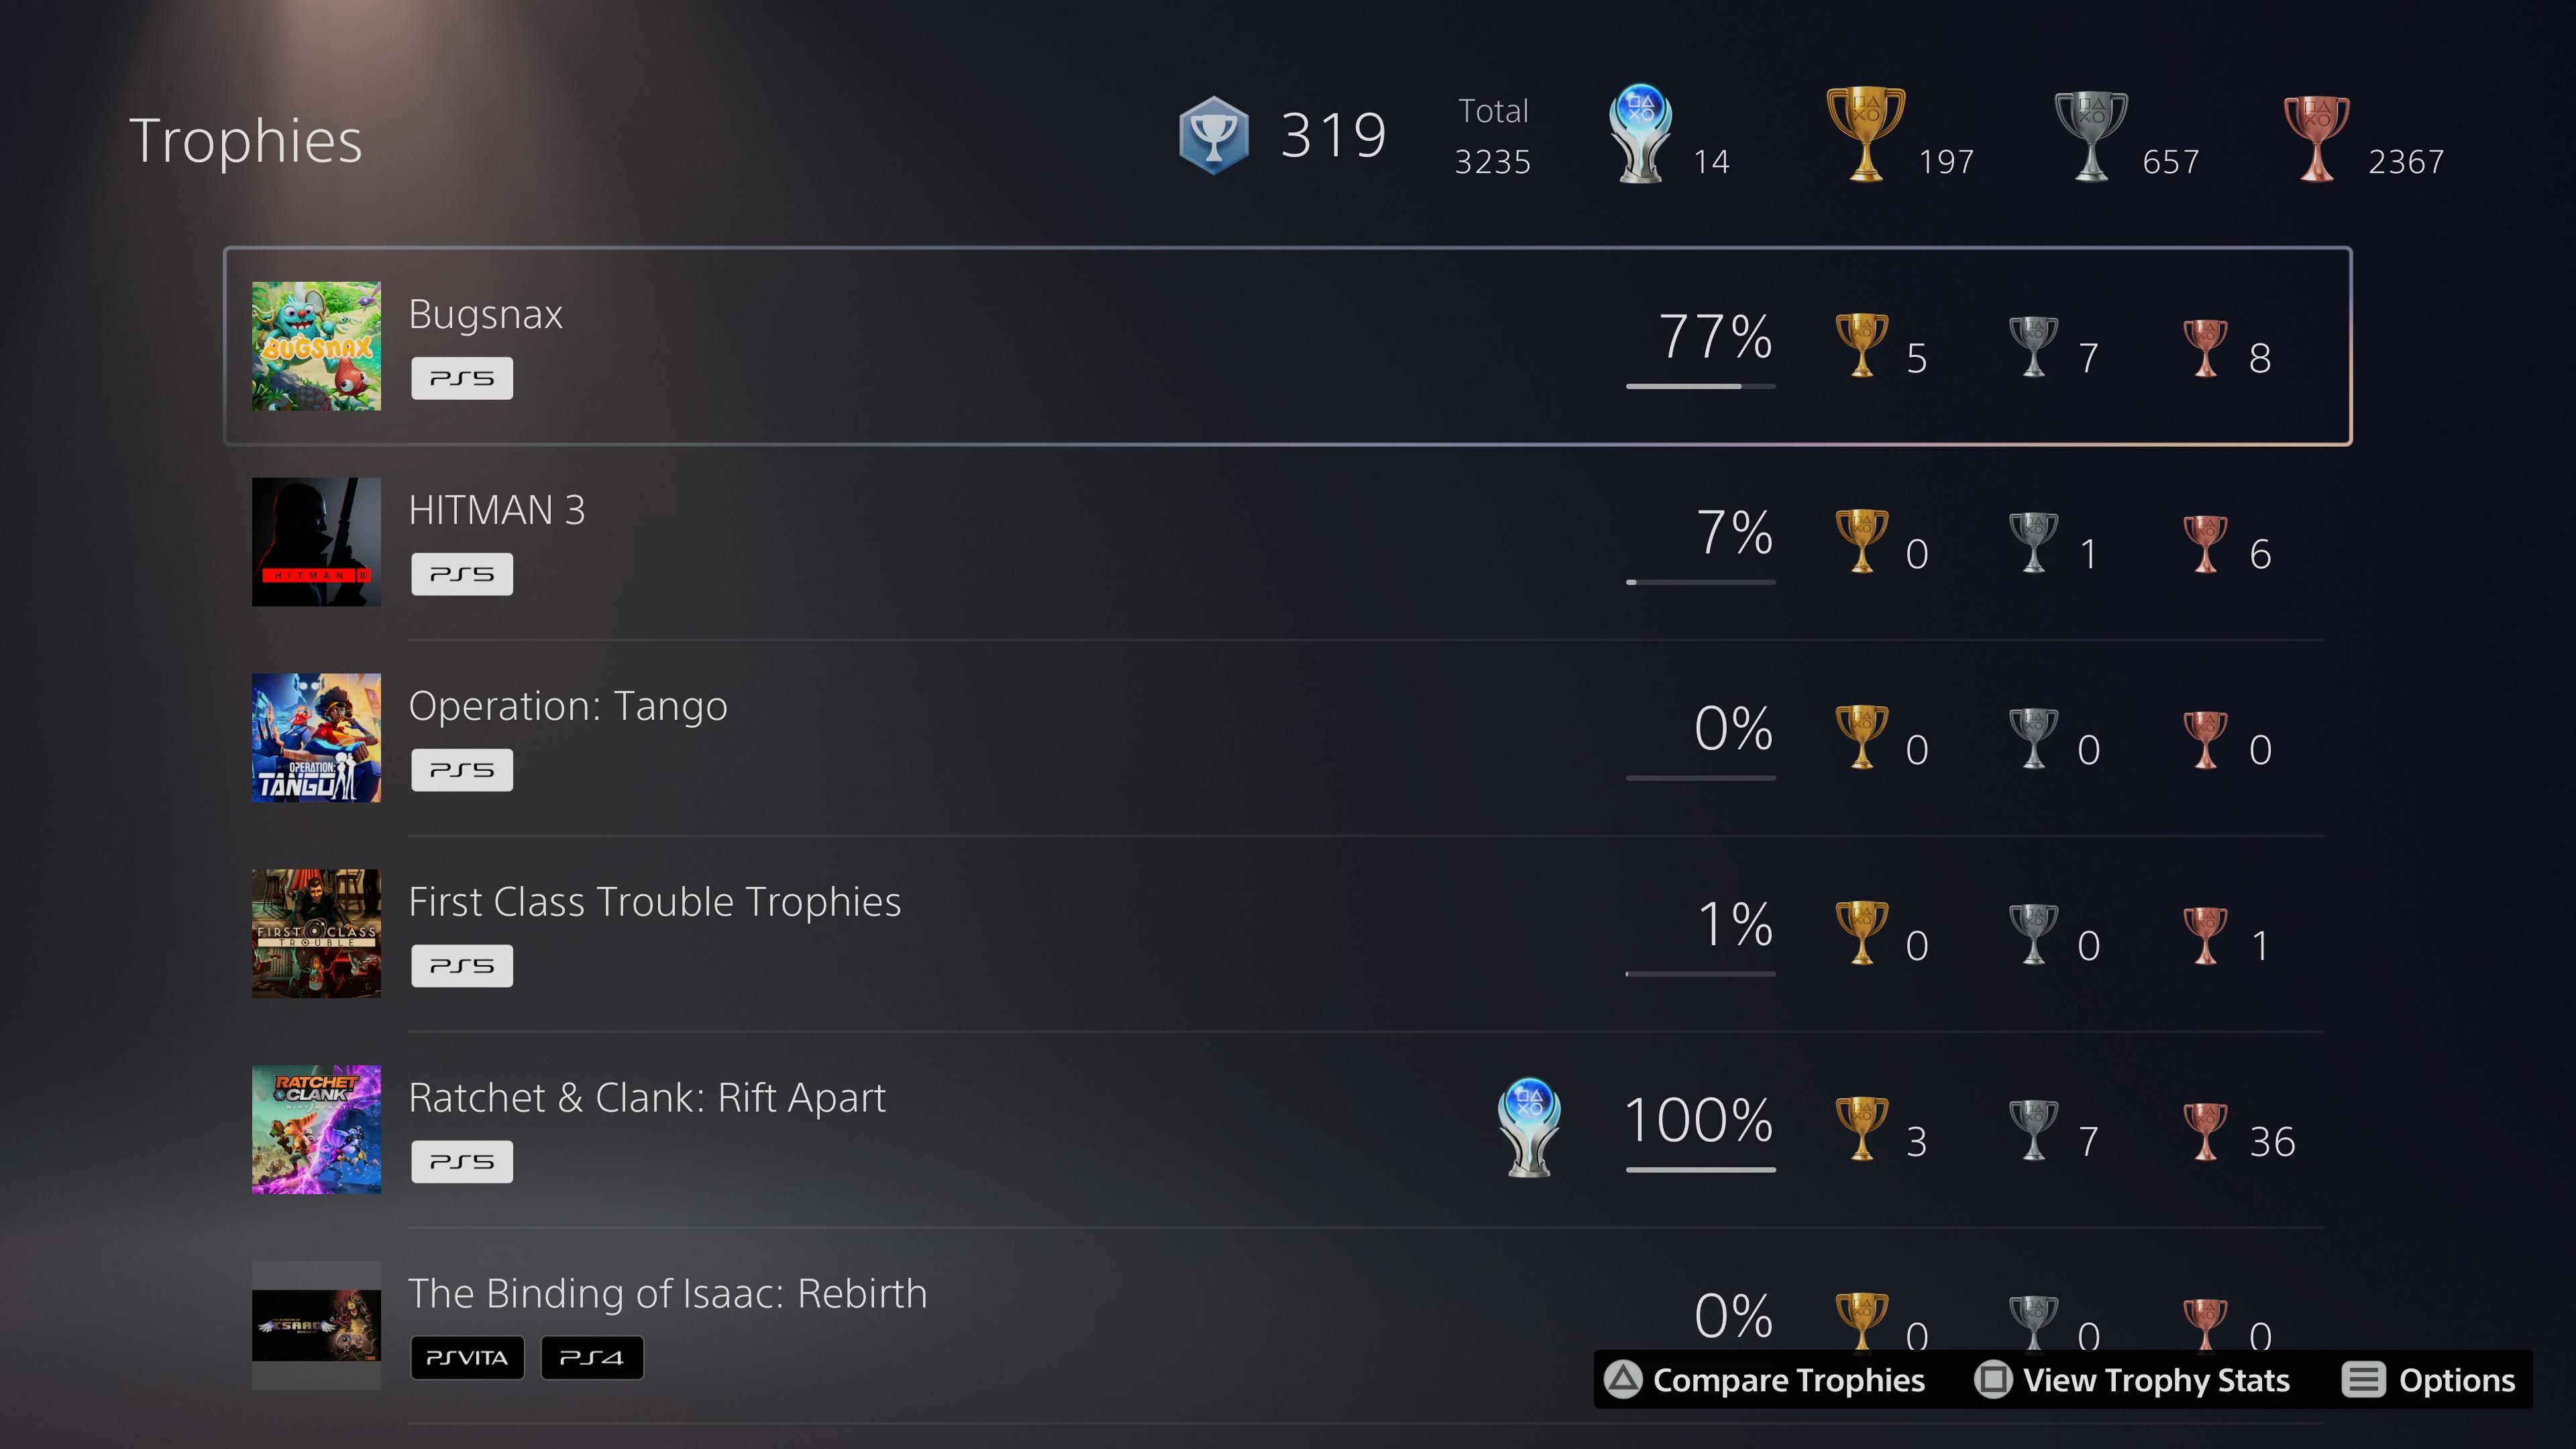 PS5 Trophy Overview